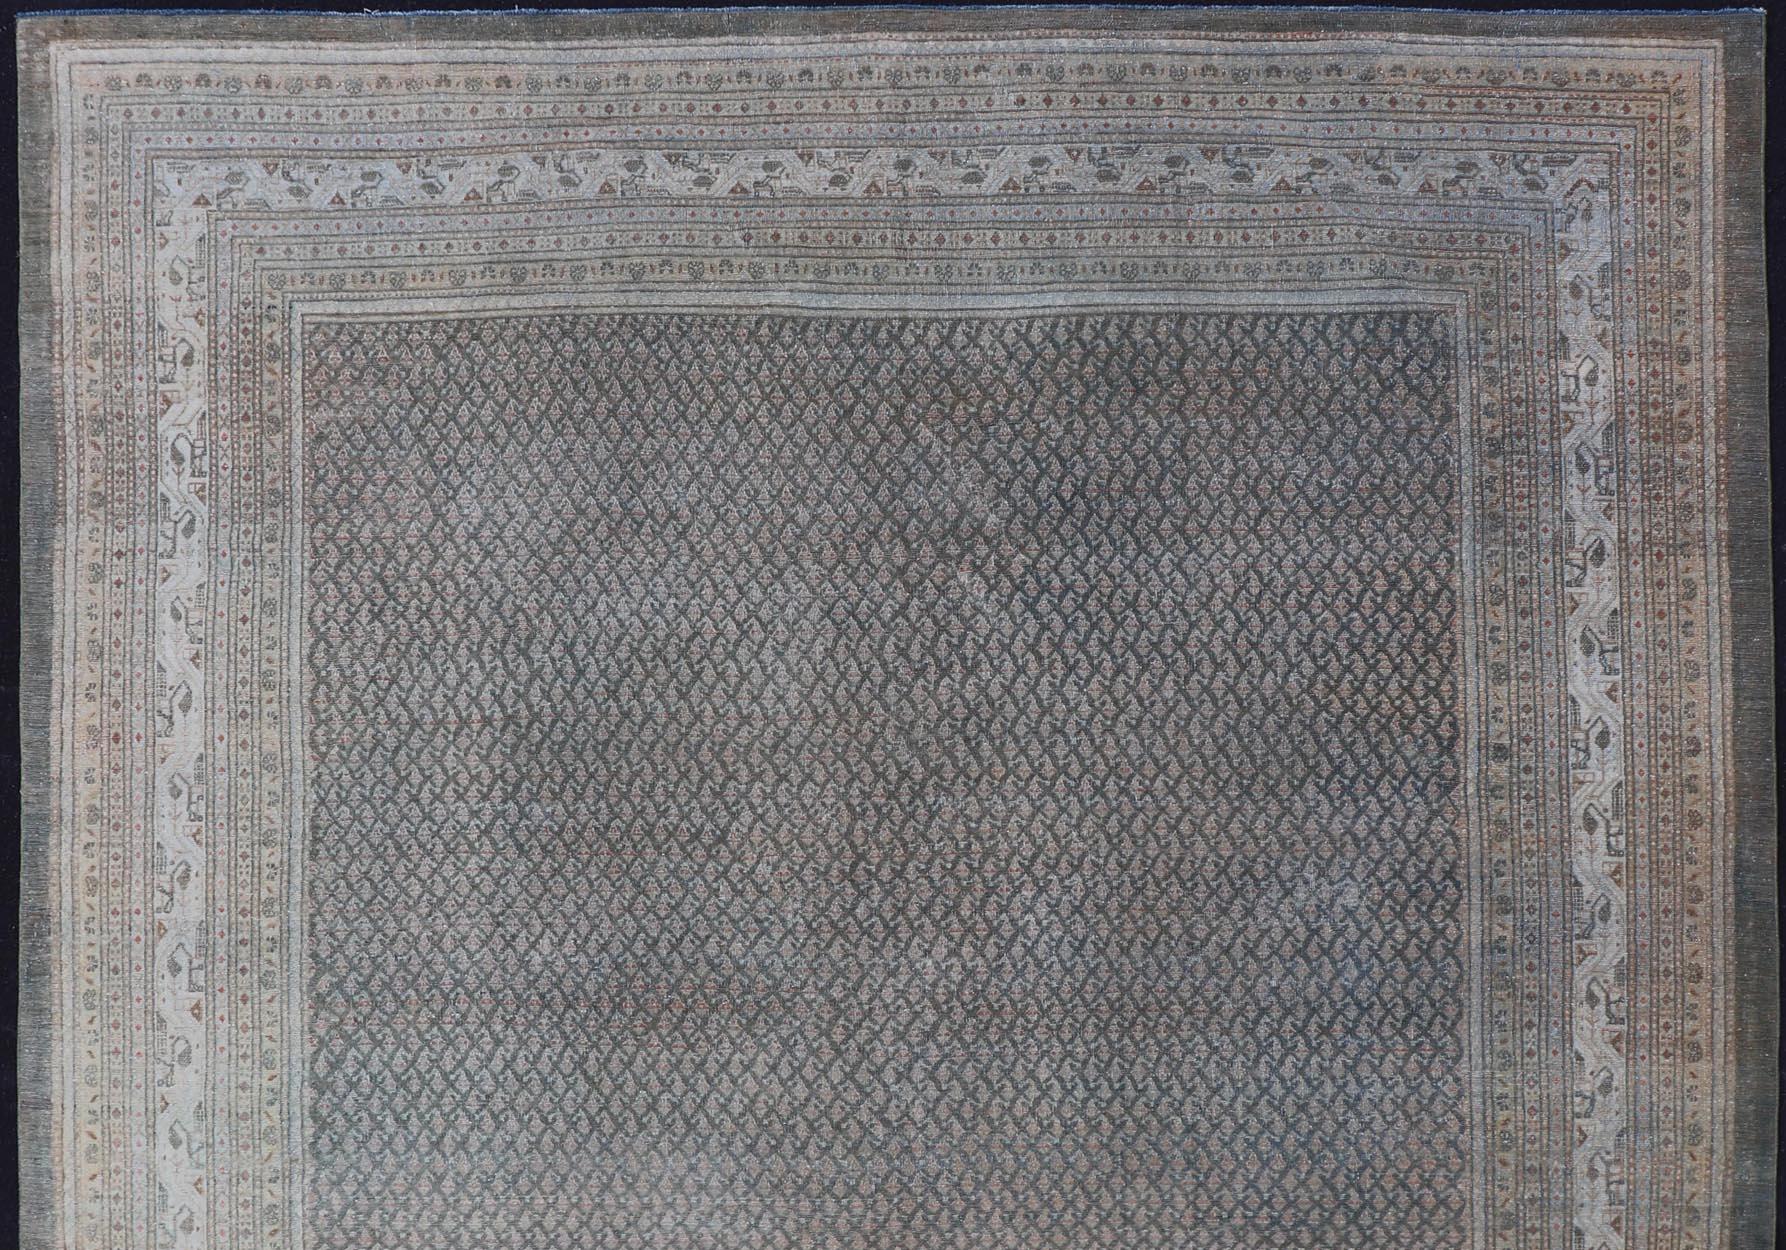 Antique Persian Tabriz Rug with all over small scale design in brown, gray and light blue. Keivan Woven Arts / rug EMB-9553-P13081, country of origin / type: Persian / Tabriz, circa Early-20th Century.

Measures: 8'10 x 11'6.